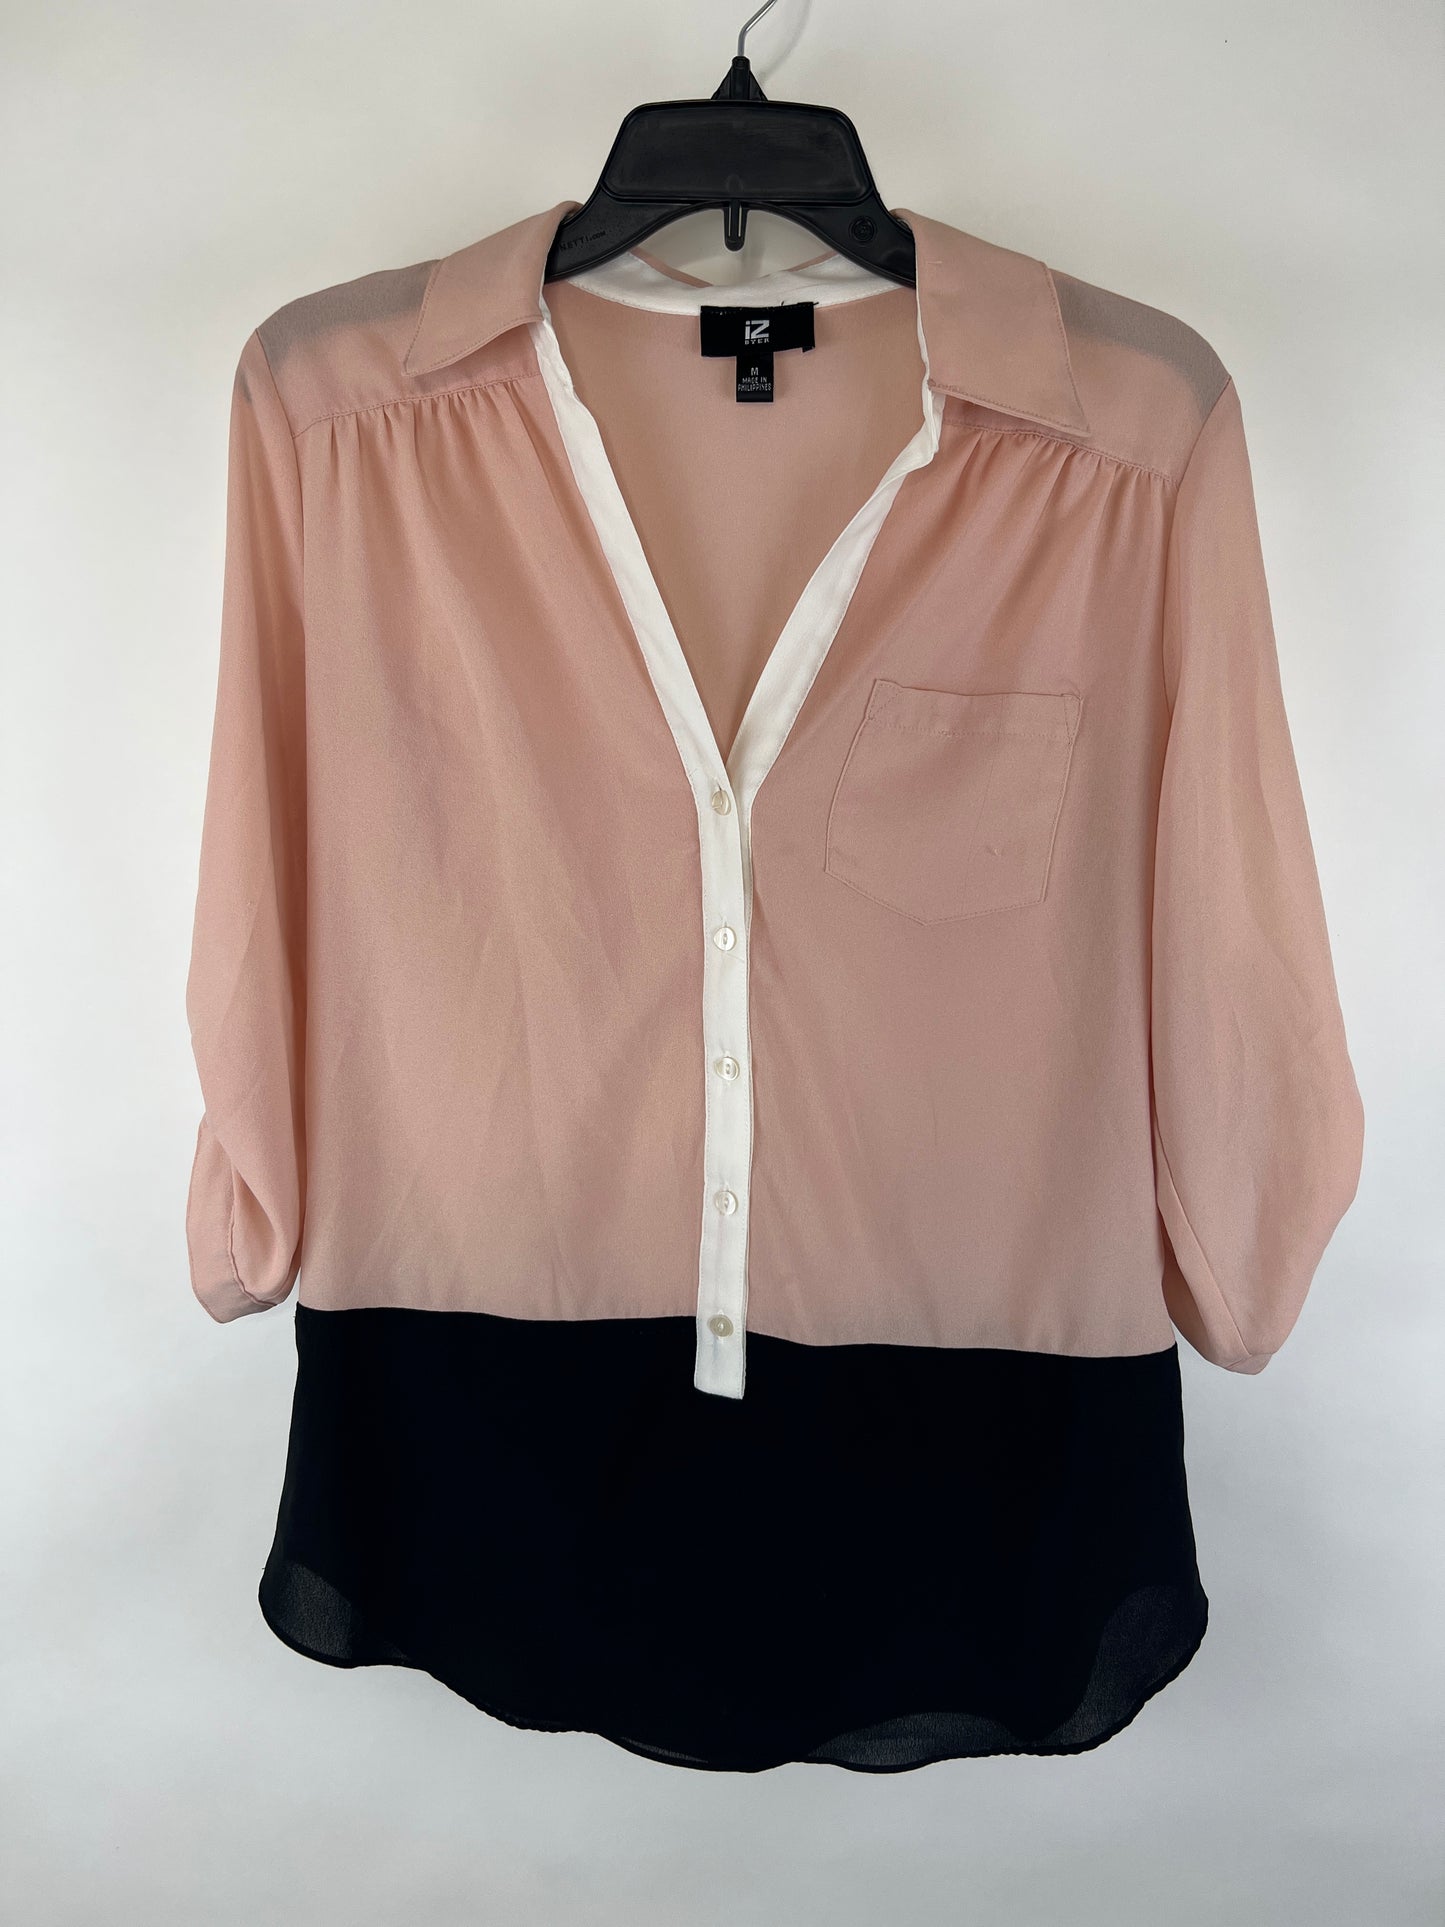 Blush Pink and Black with White Detail Button Up Collared 3/4 Sleeve Dress Shirt - M